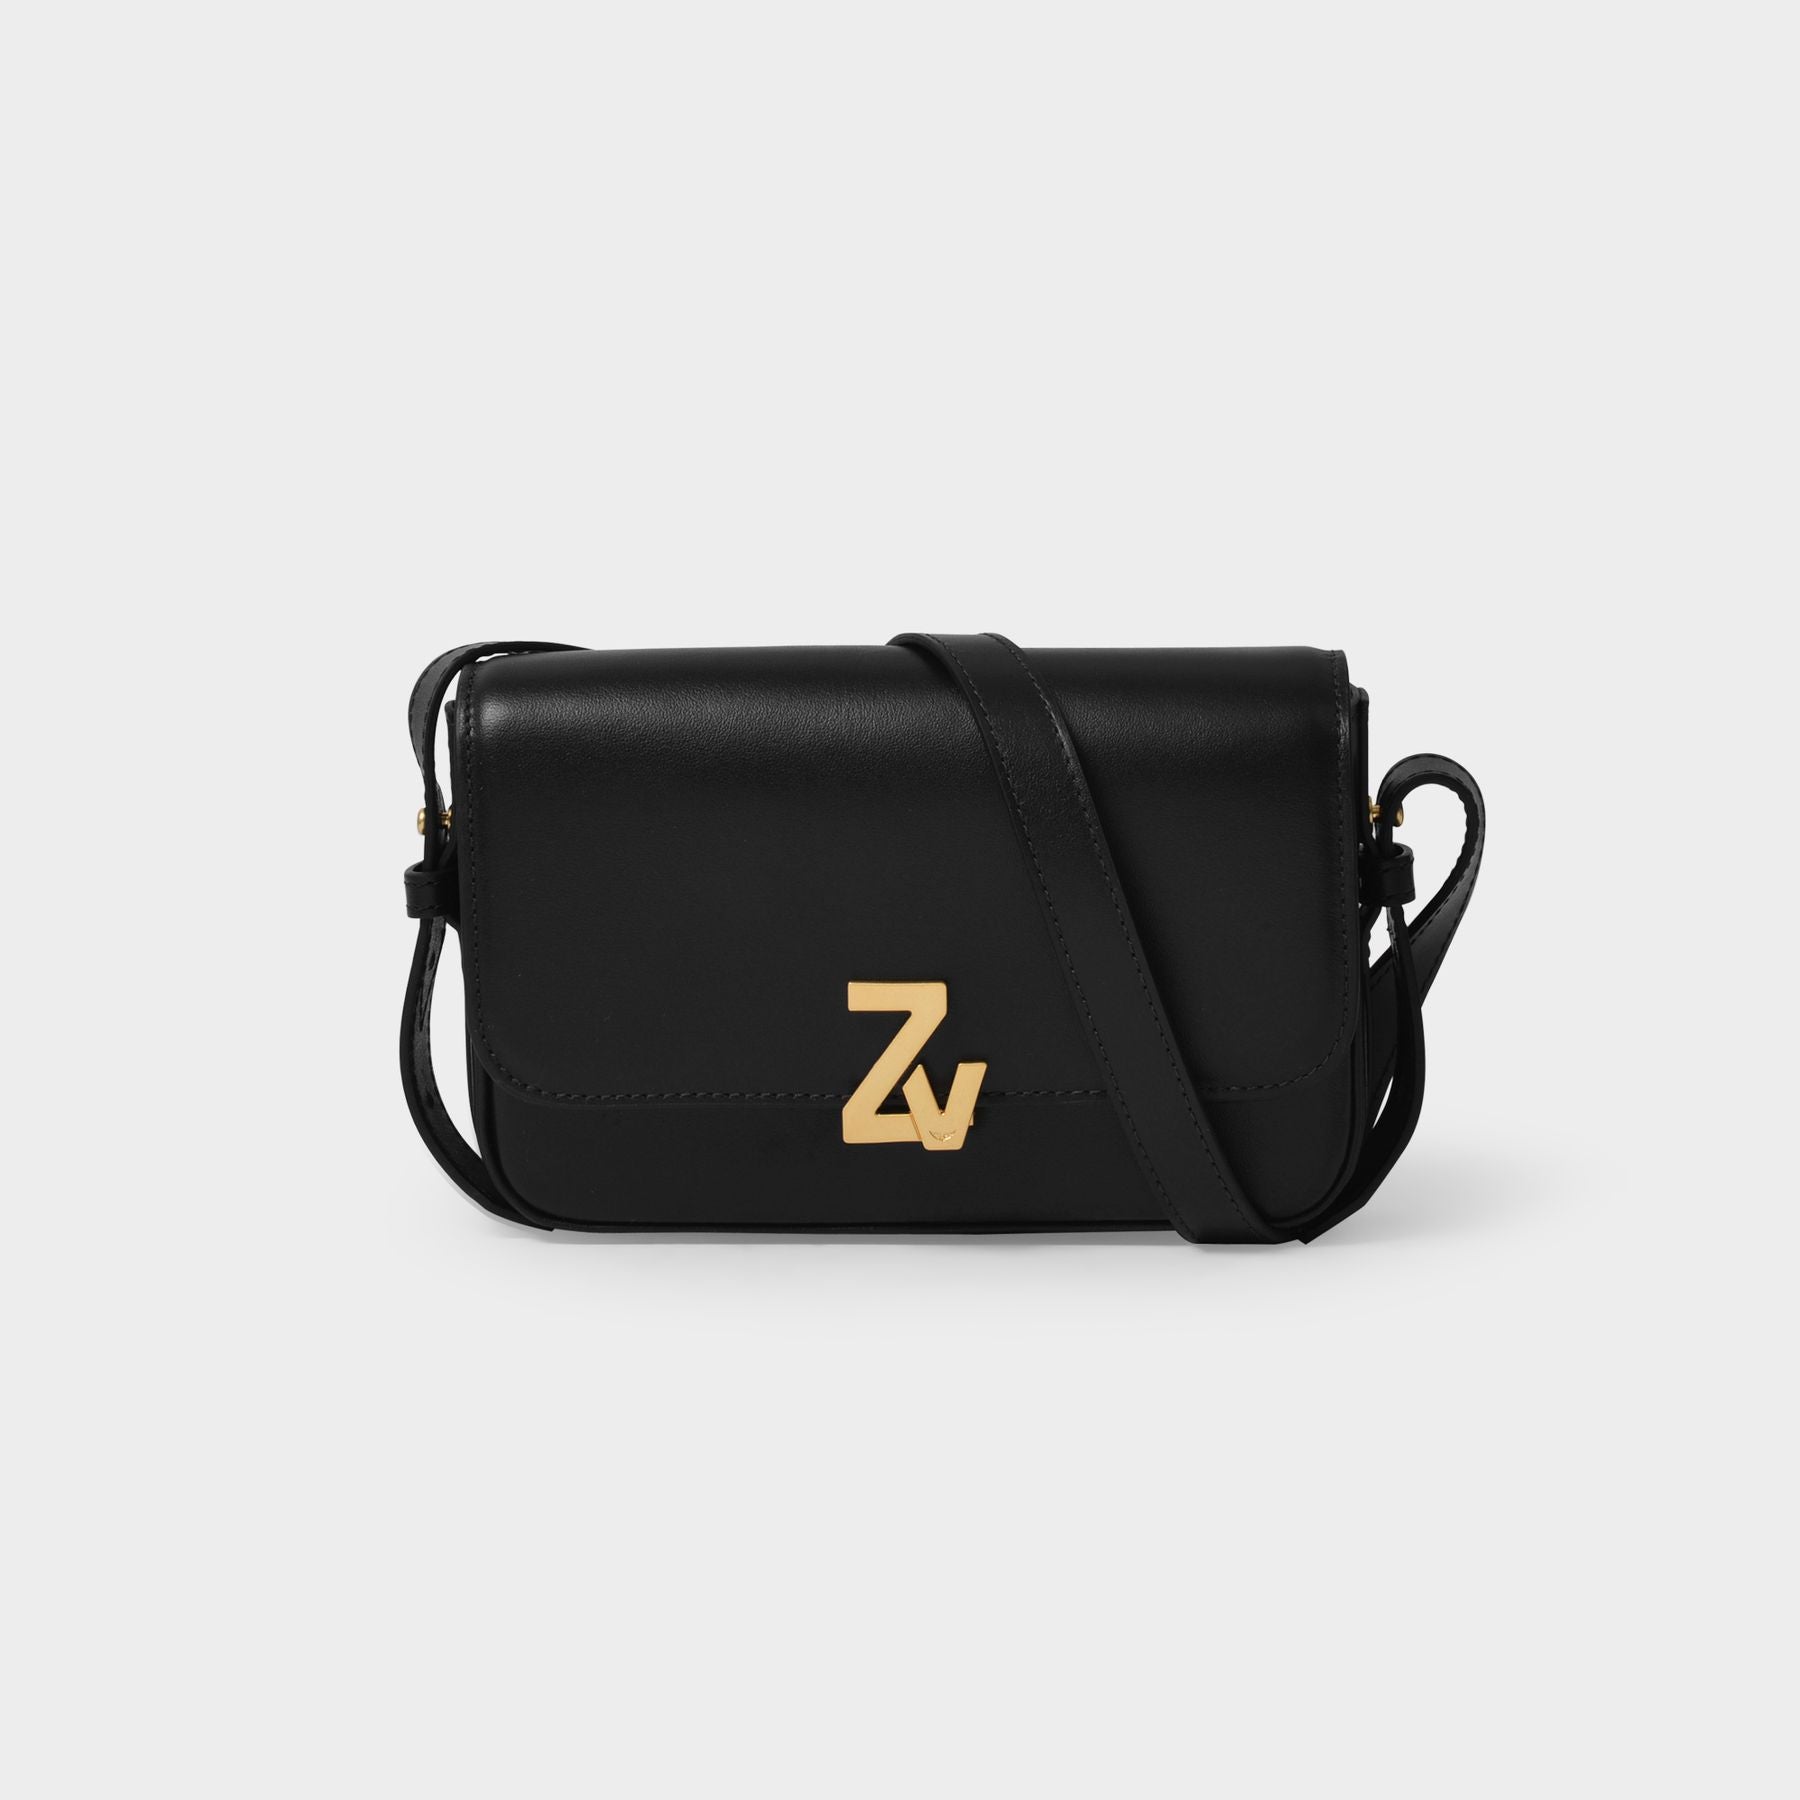 Le Mini Zv Initiale Bag by Zadig & Voltaire at ORCHARD MILE